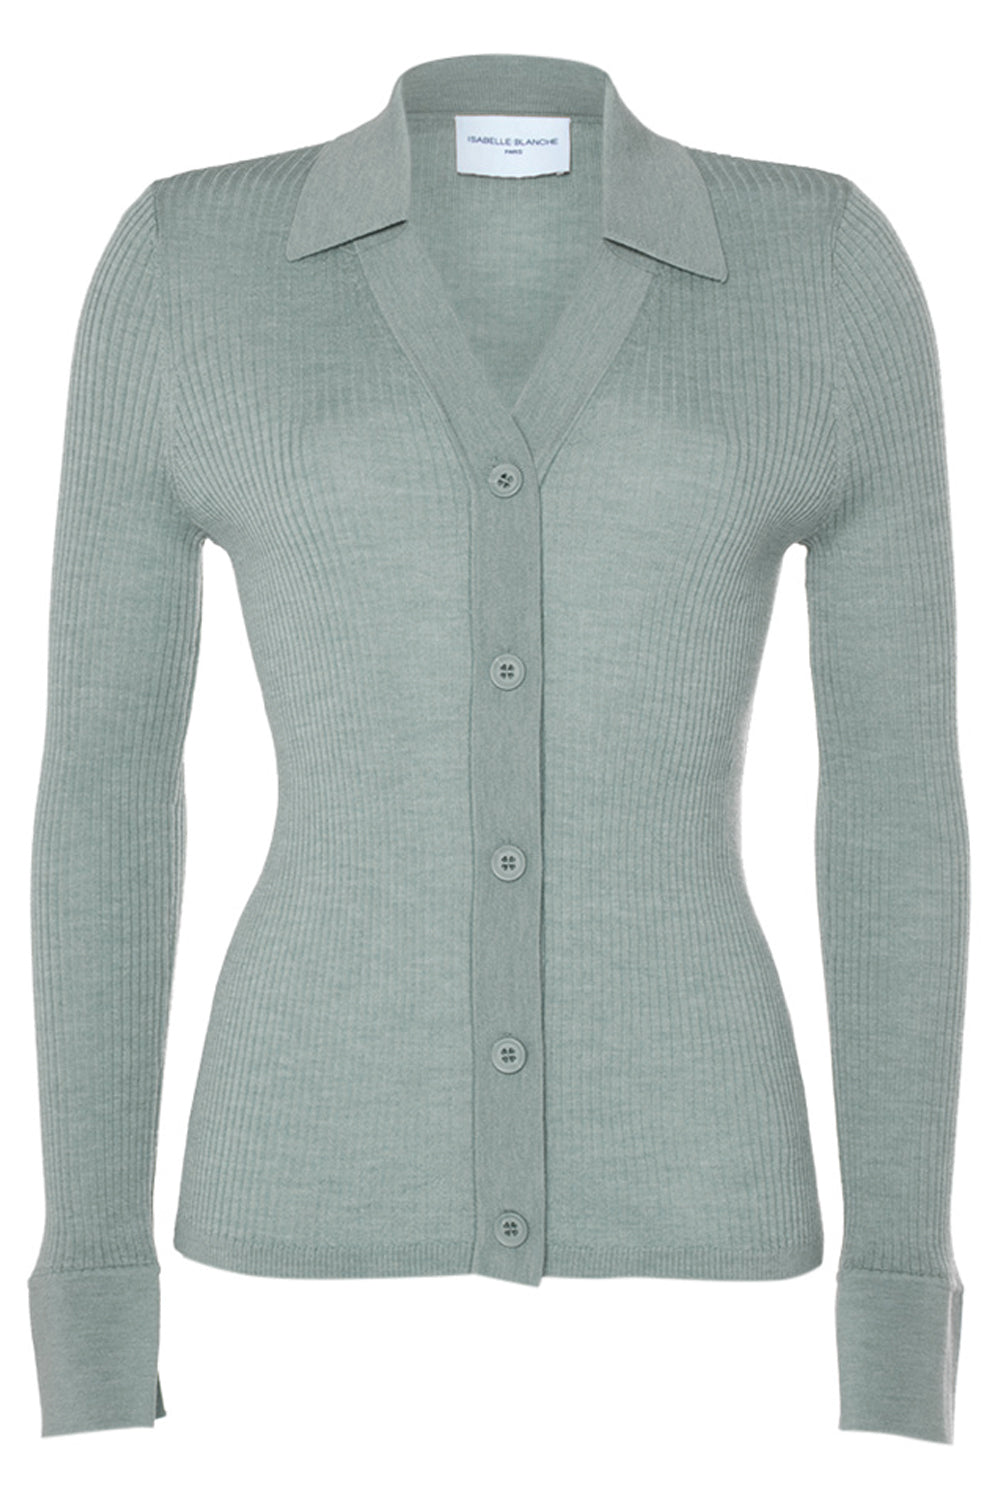 Image of ISABELLE BLANCHE Cardigan in lana